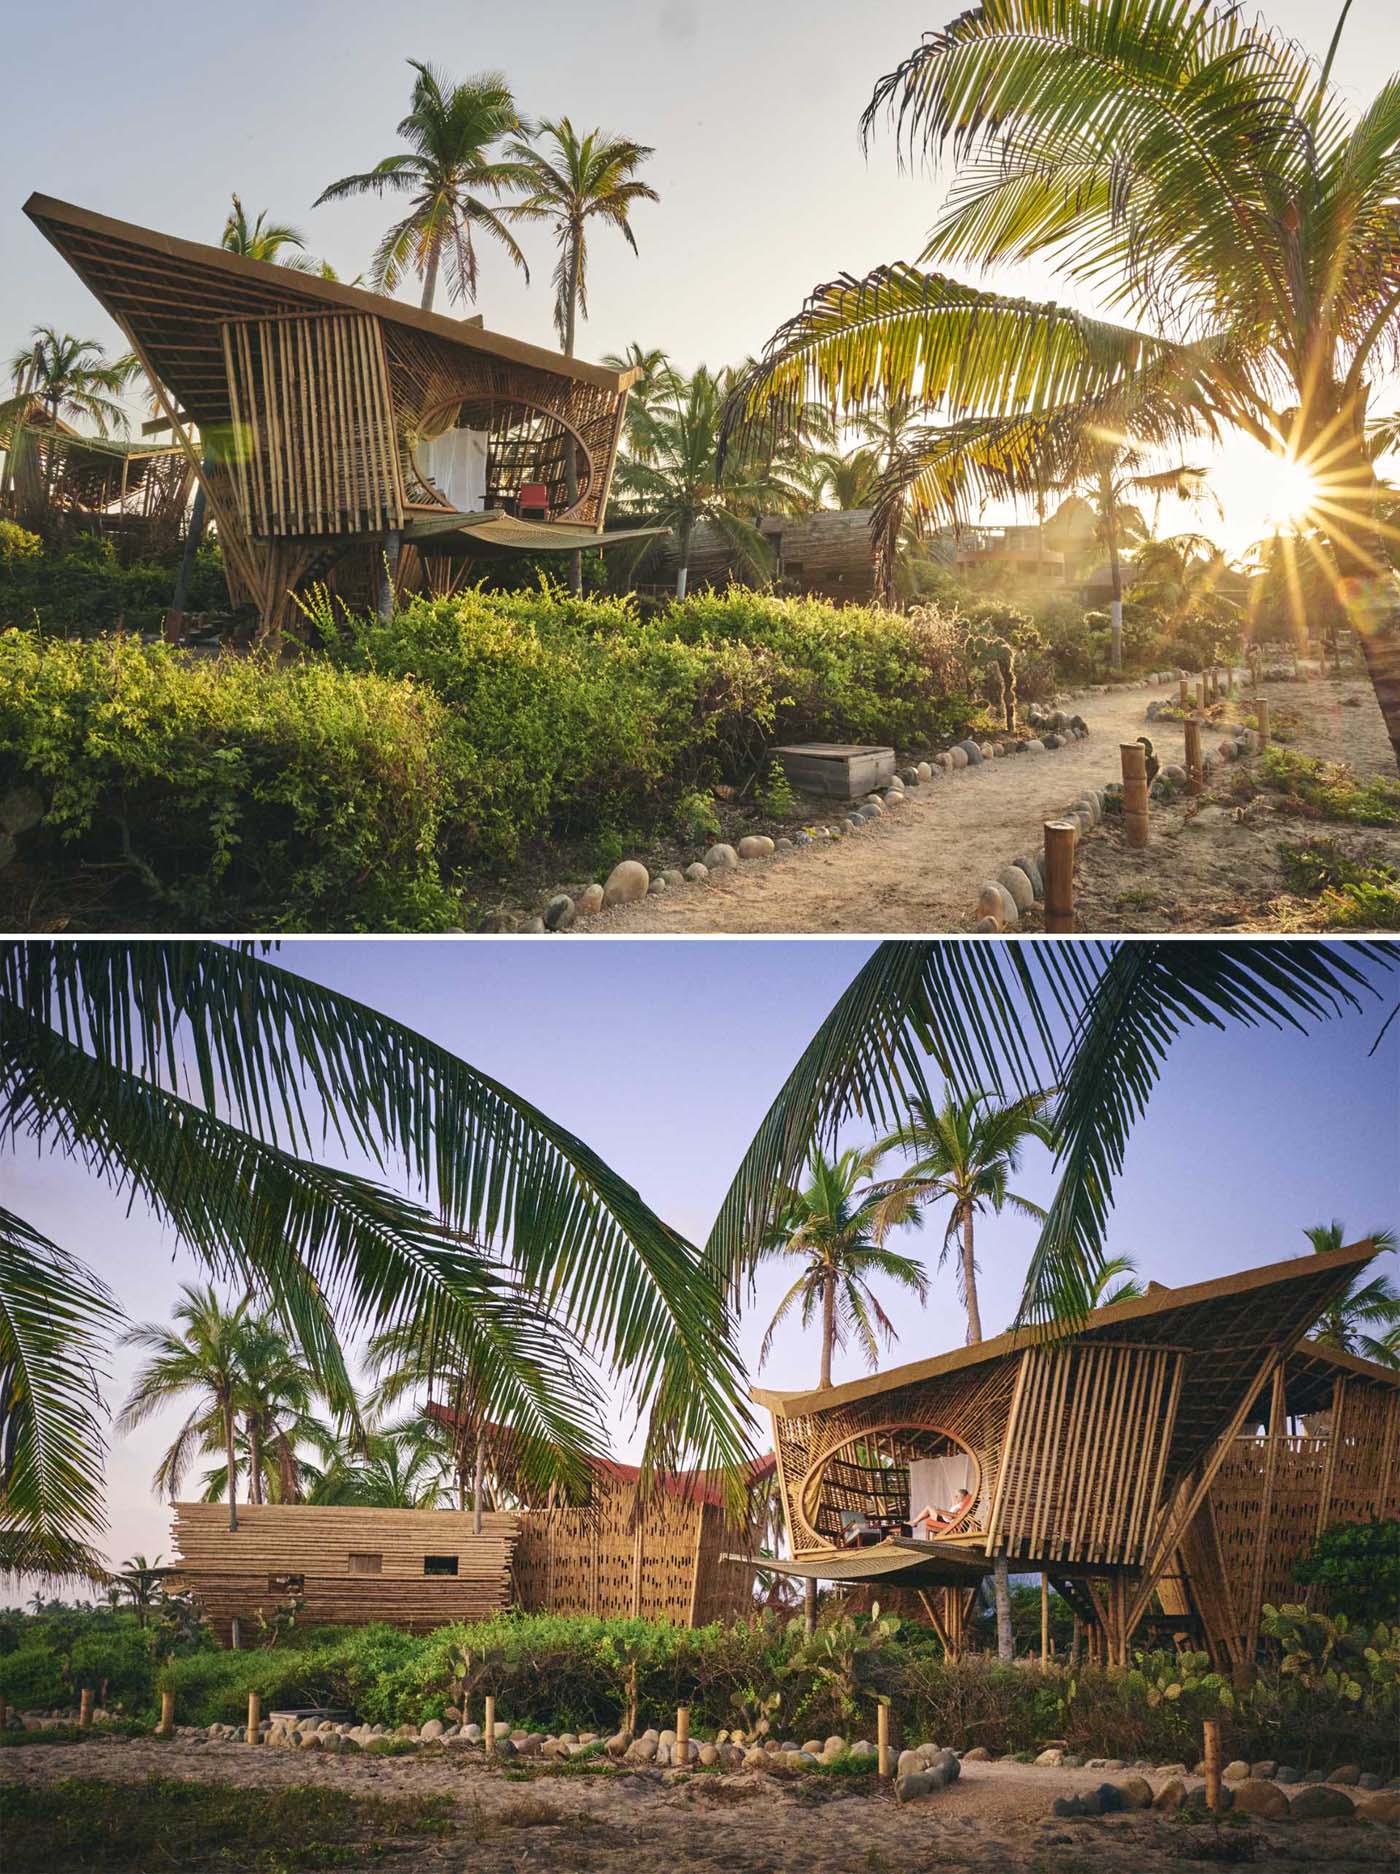 These modern bamboo  treehouses have large roof eaves that act like a big umbrella, providing shade for the strong heat of the sun and protection from heavy rains, while the facade louvers allow for natural cross ventilation.